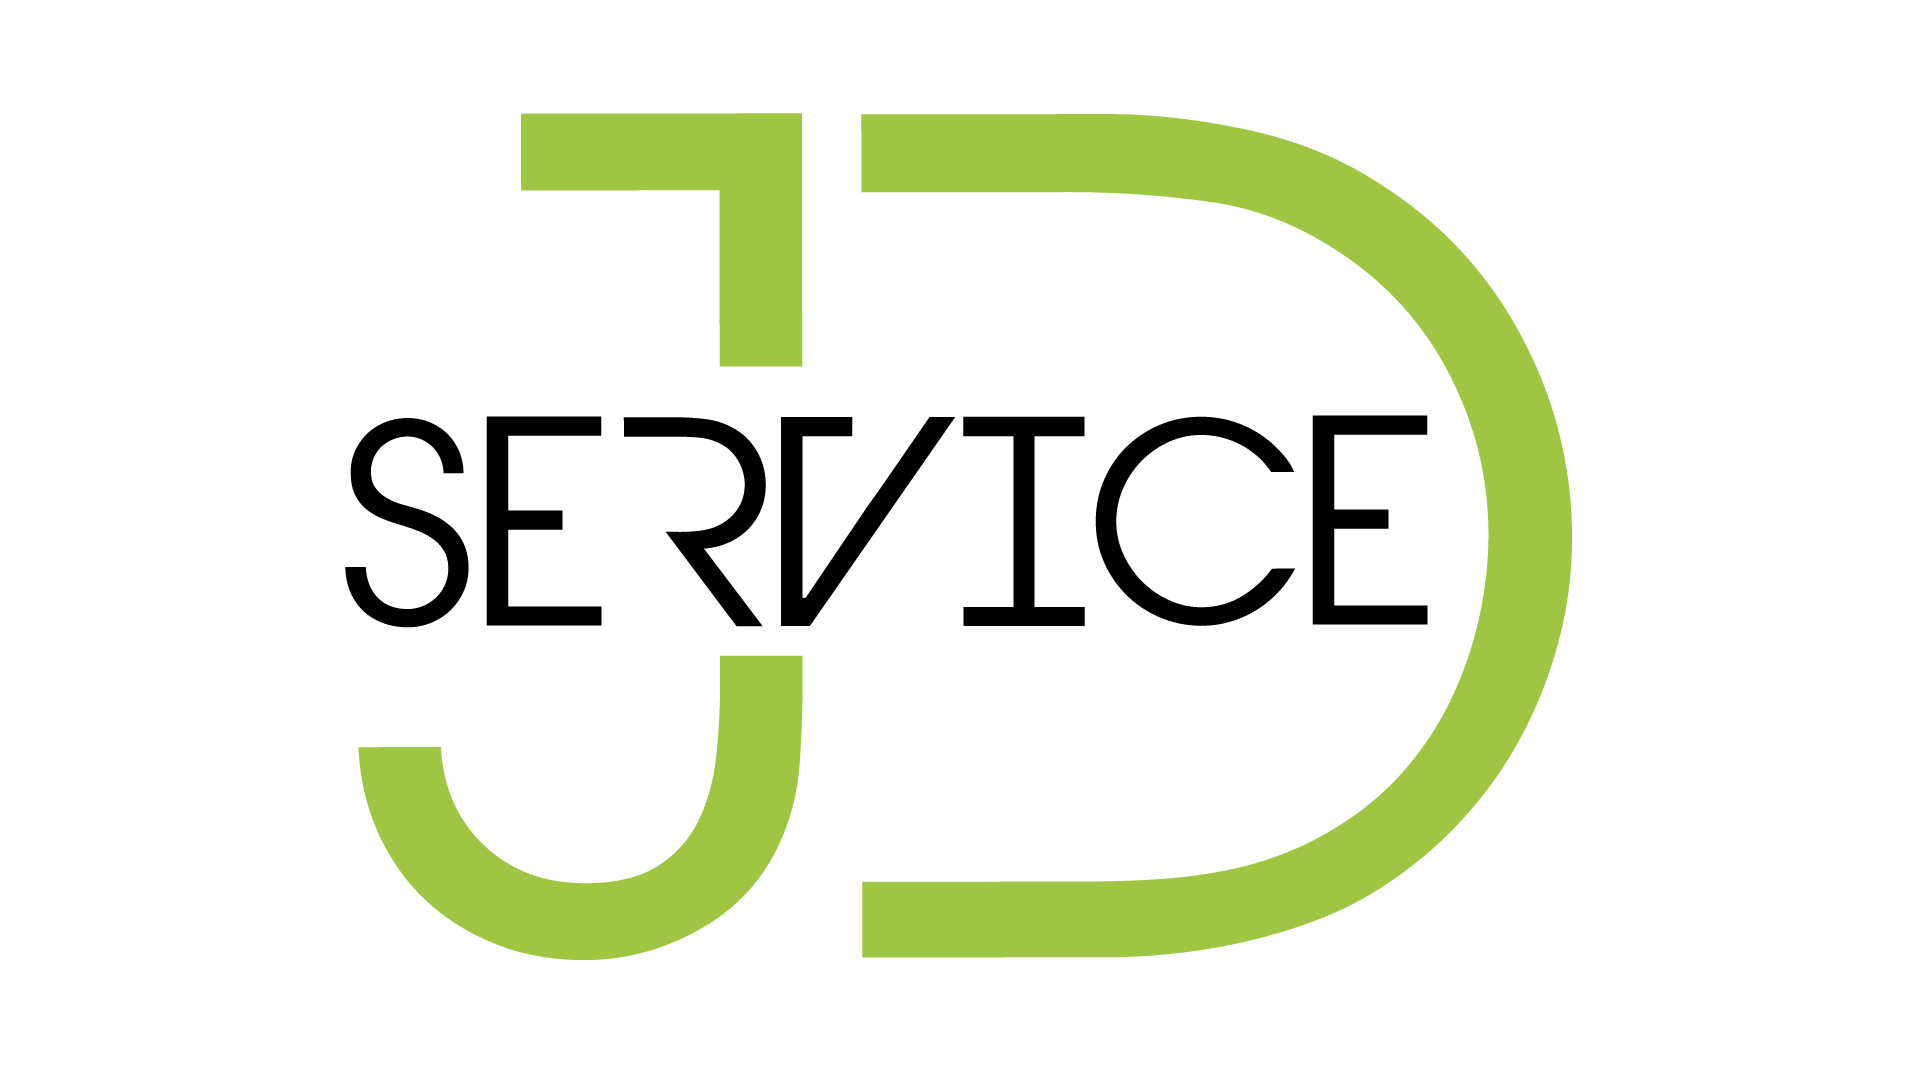 Contact - JD Services